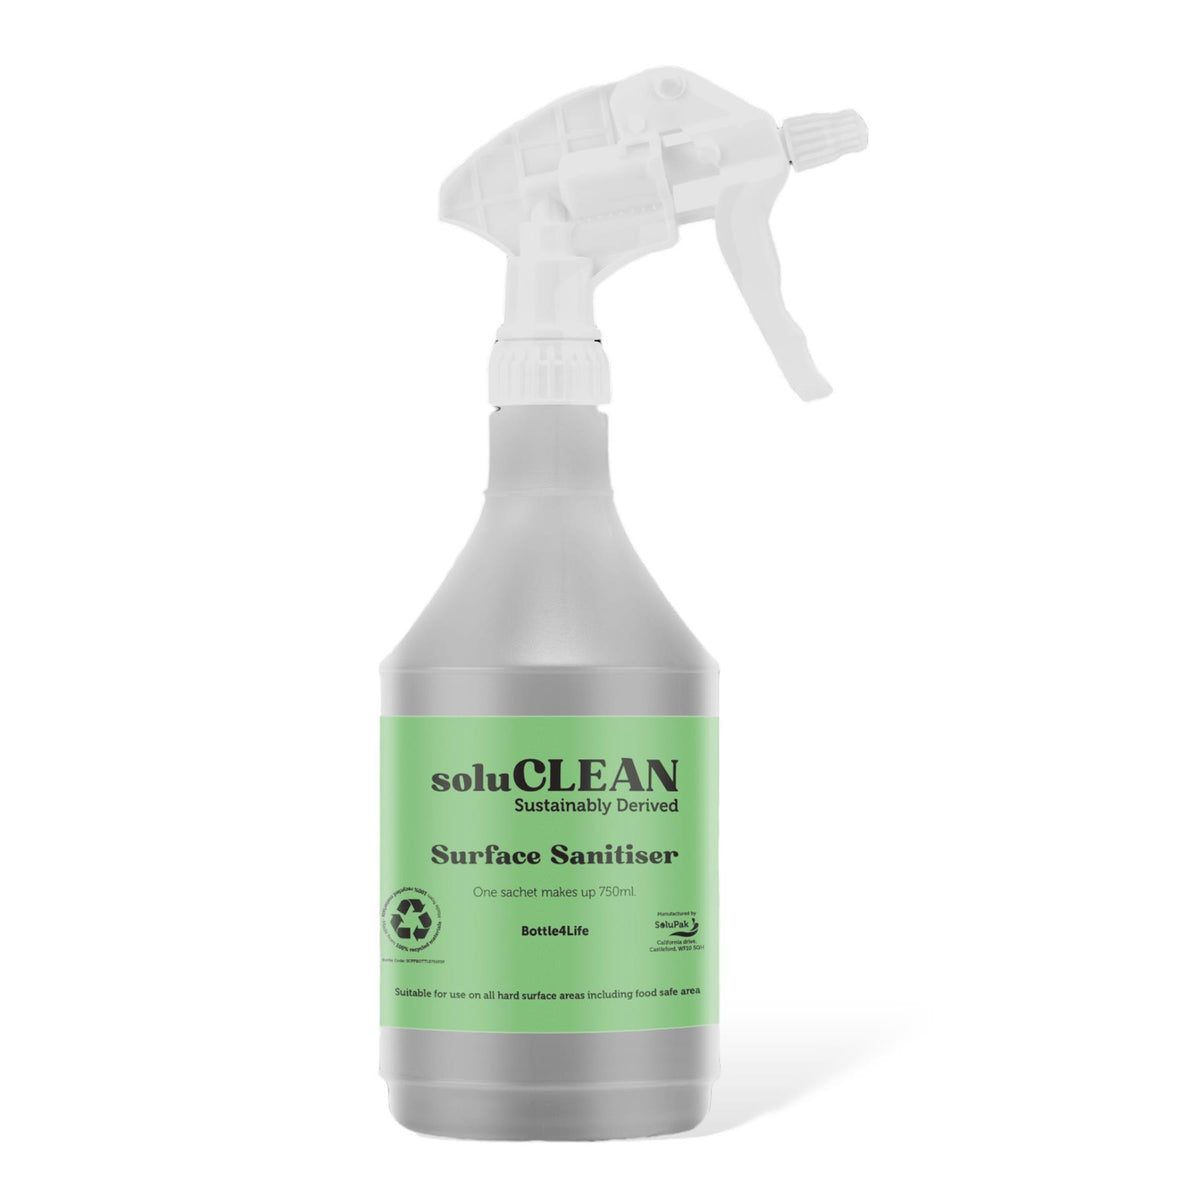 Soluclean, Surface Sanitiser, 750ml Empty Trigger Spray Bottle for HouseHold Cleaning, Made from 100% Recycled Materials